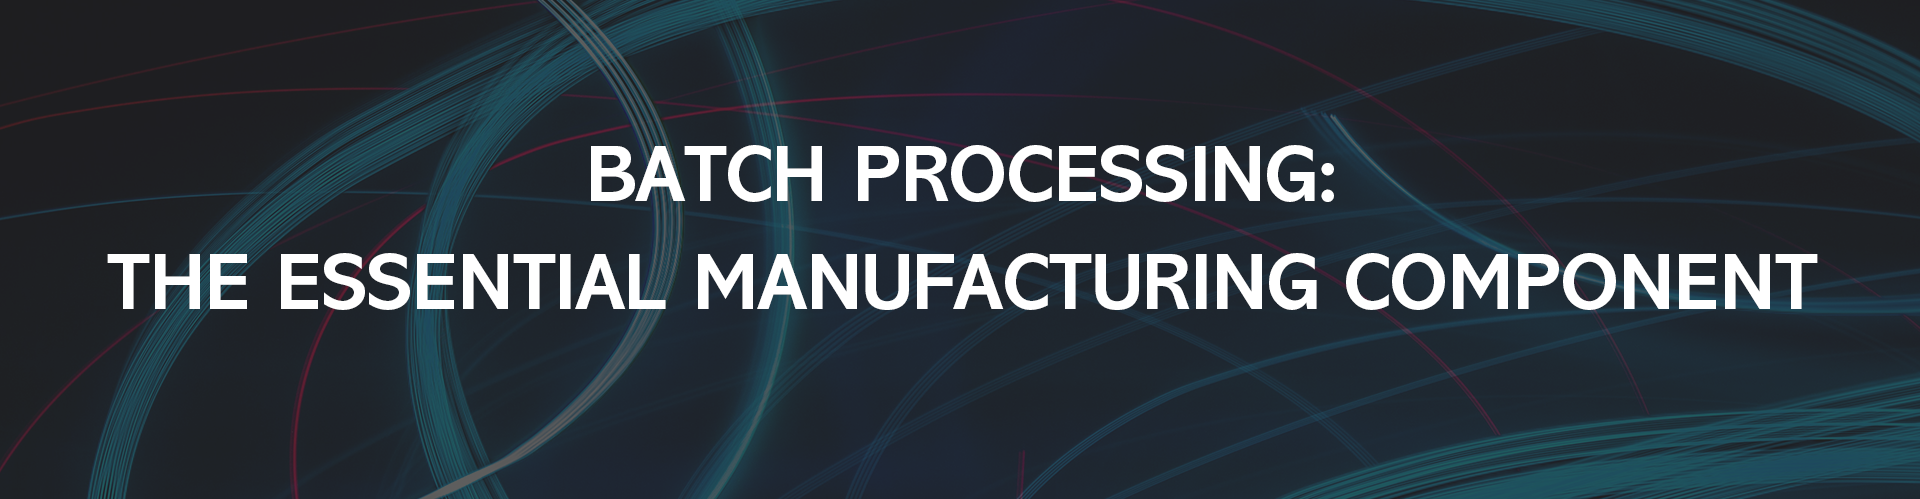 Batch Processing: The Essential Manufacturing Component